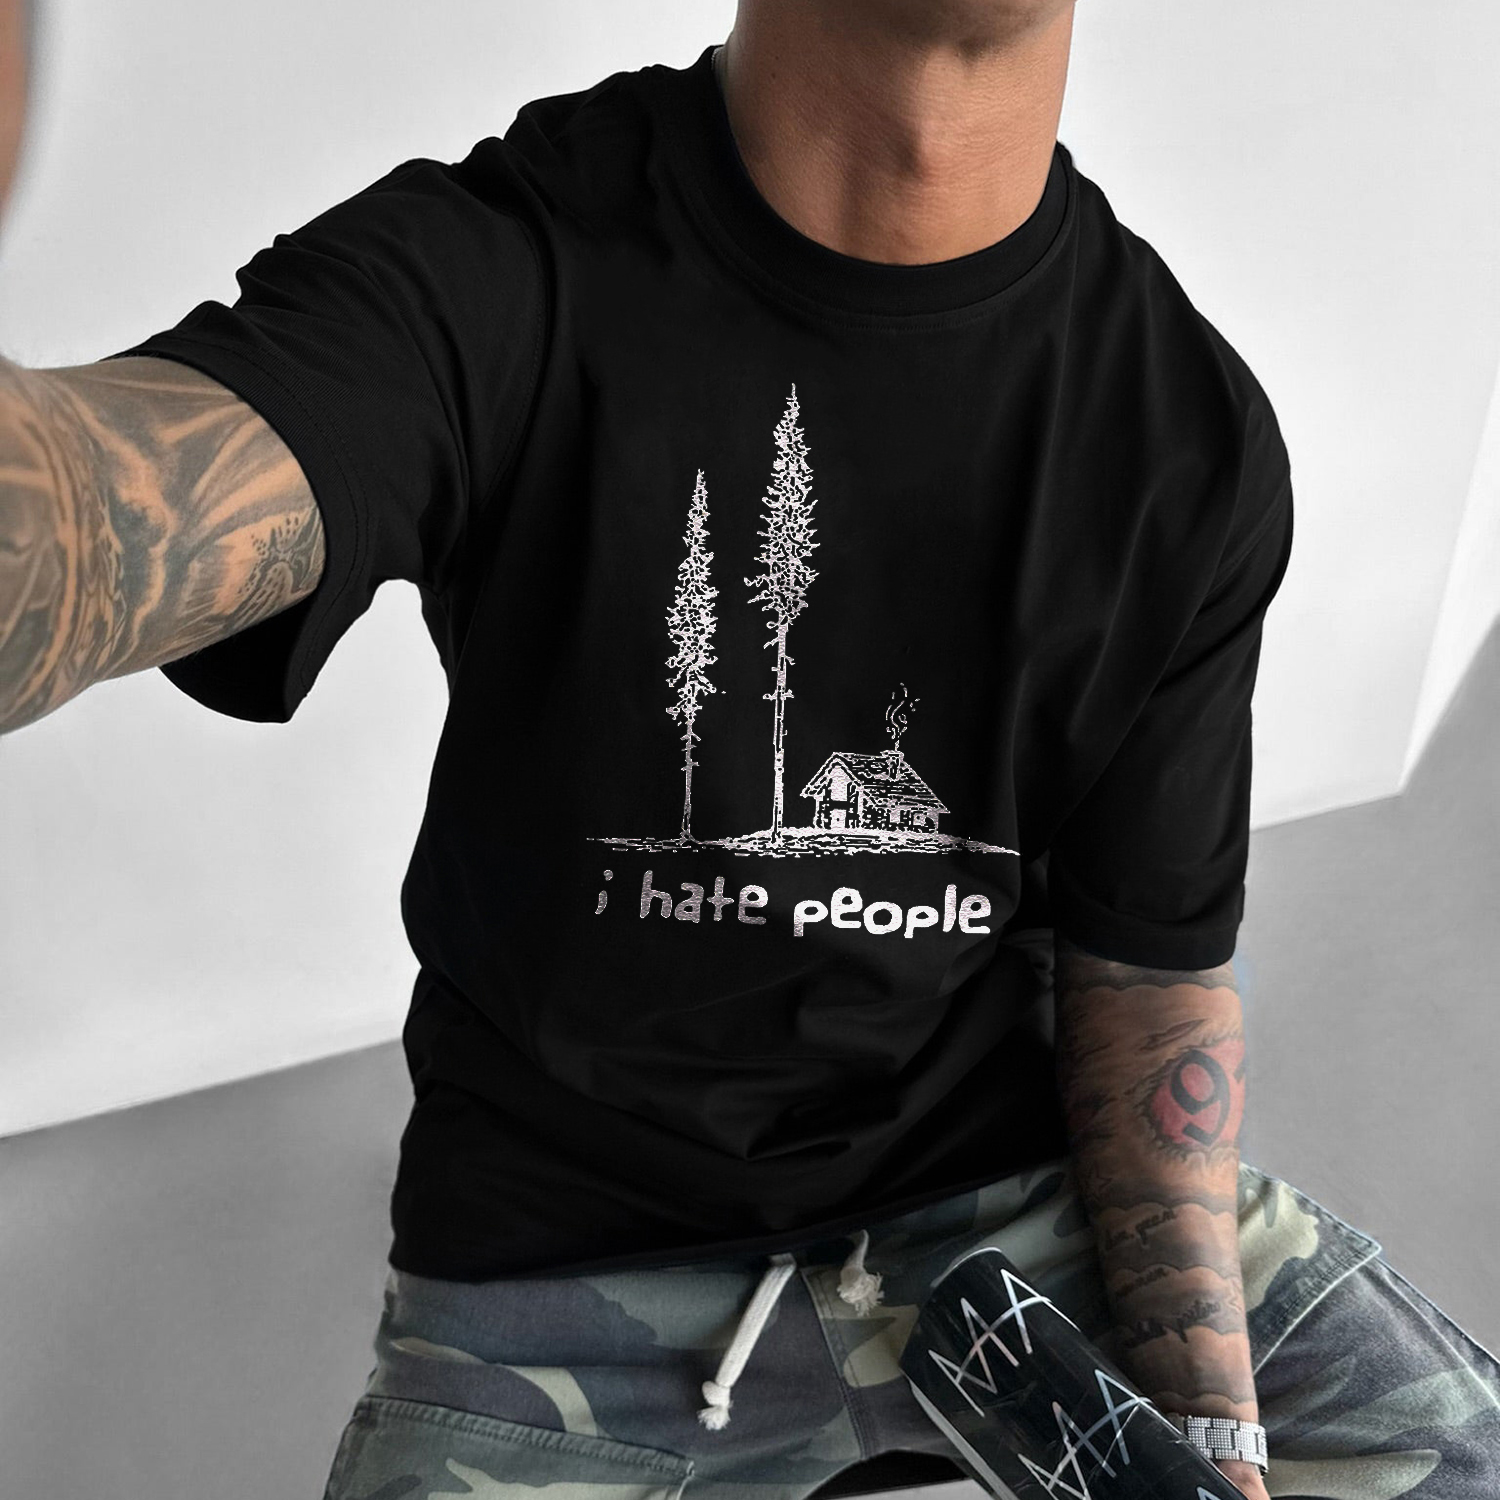 I Hate People T-shirt